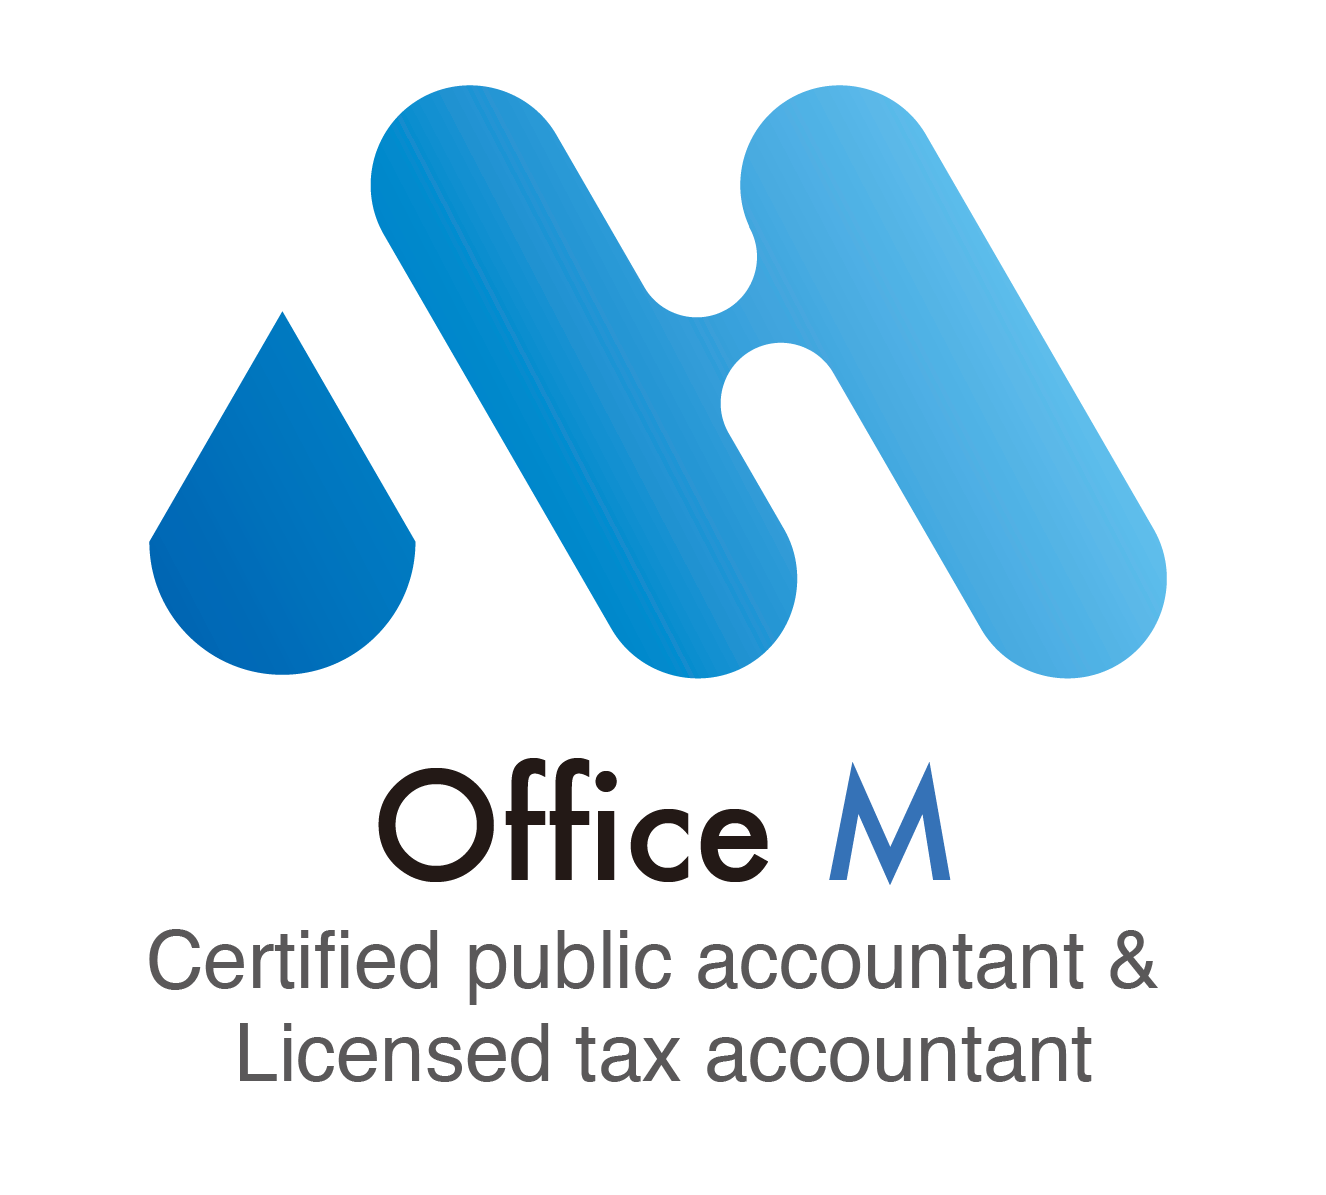 Profile Picture−Certified public accountant & Licensed tax accountant